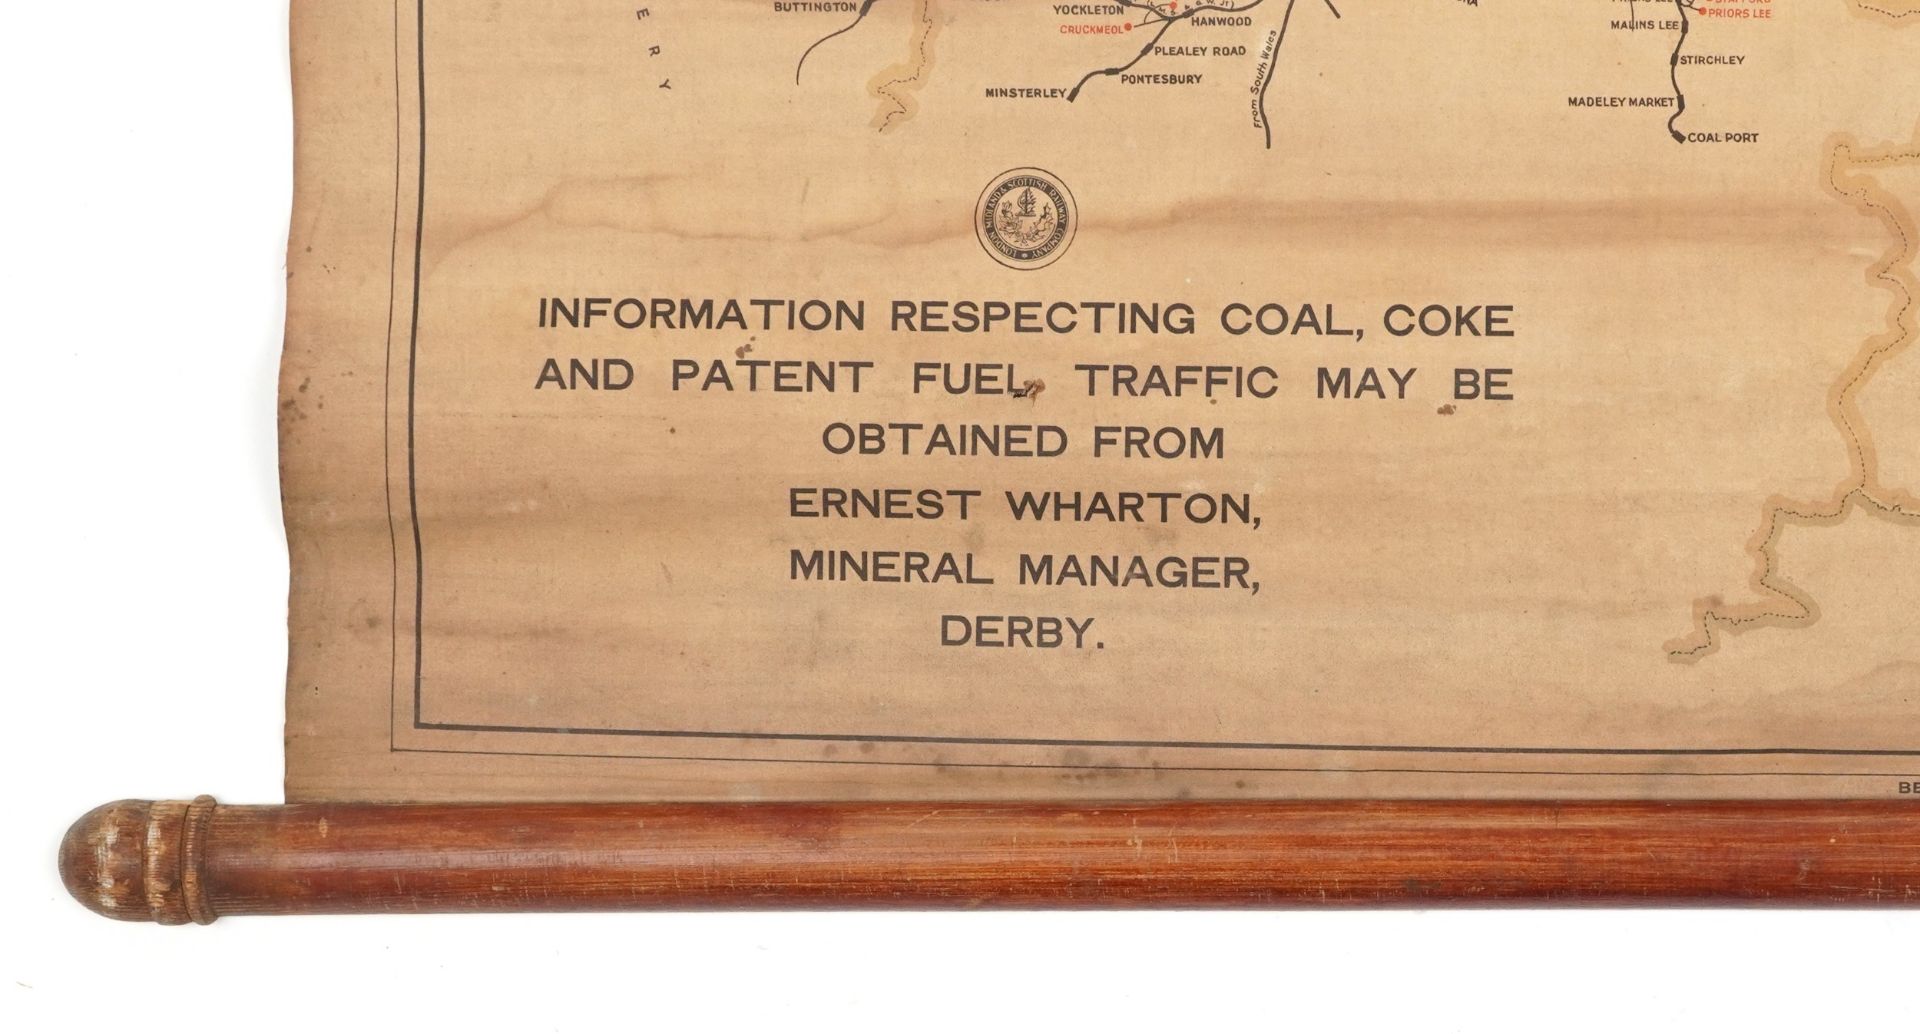 London Midland and Scottish railway railwayana interest wall hanging diagram showing collieries - Image 3 of 5